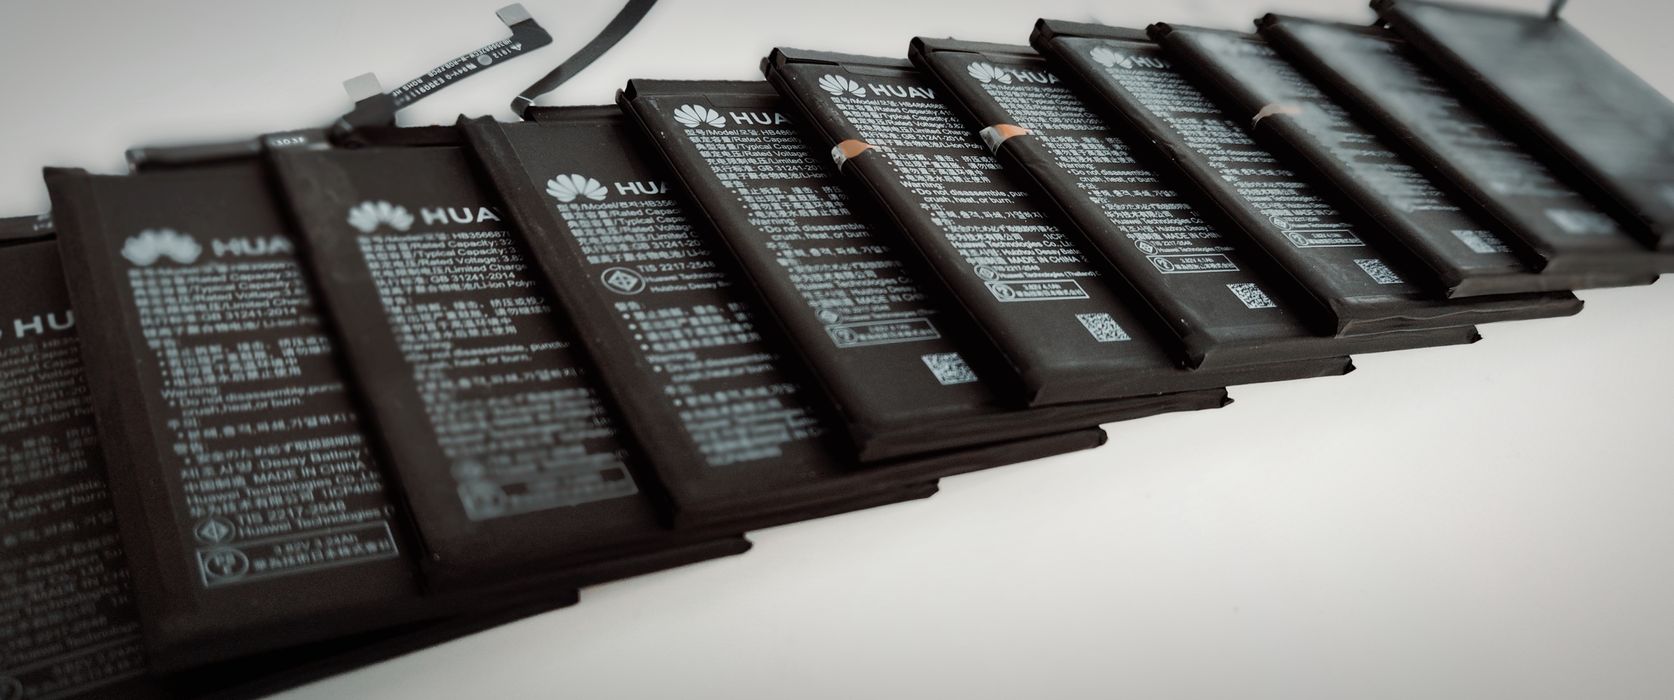 When should you replace the smartphone battery?